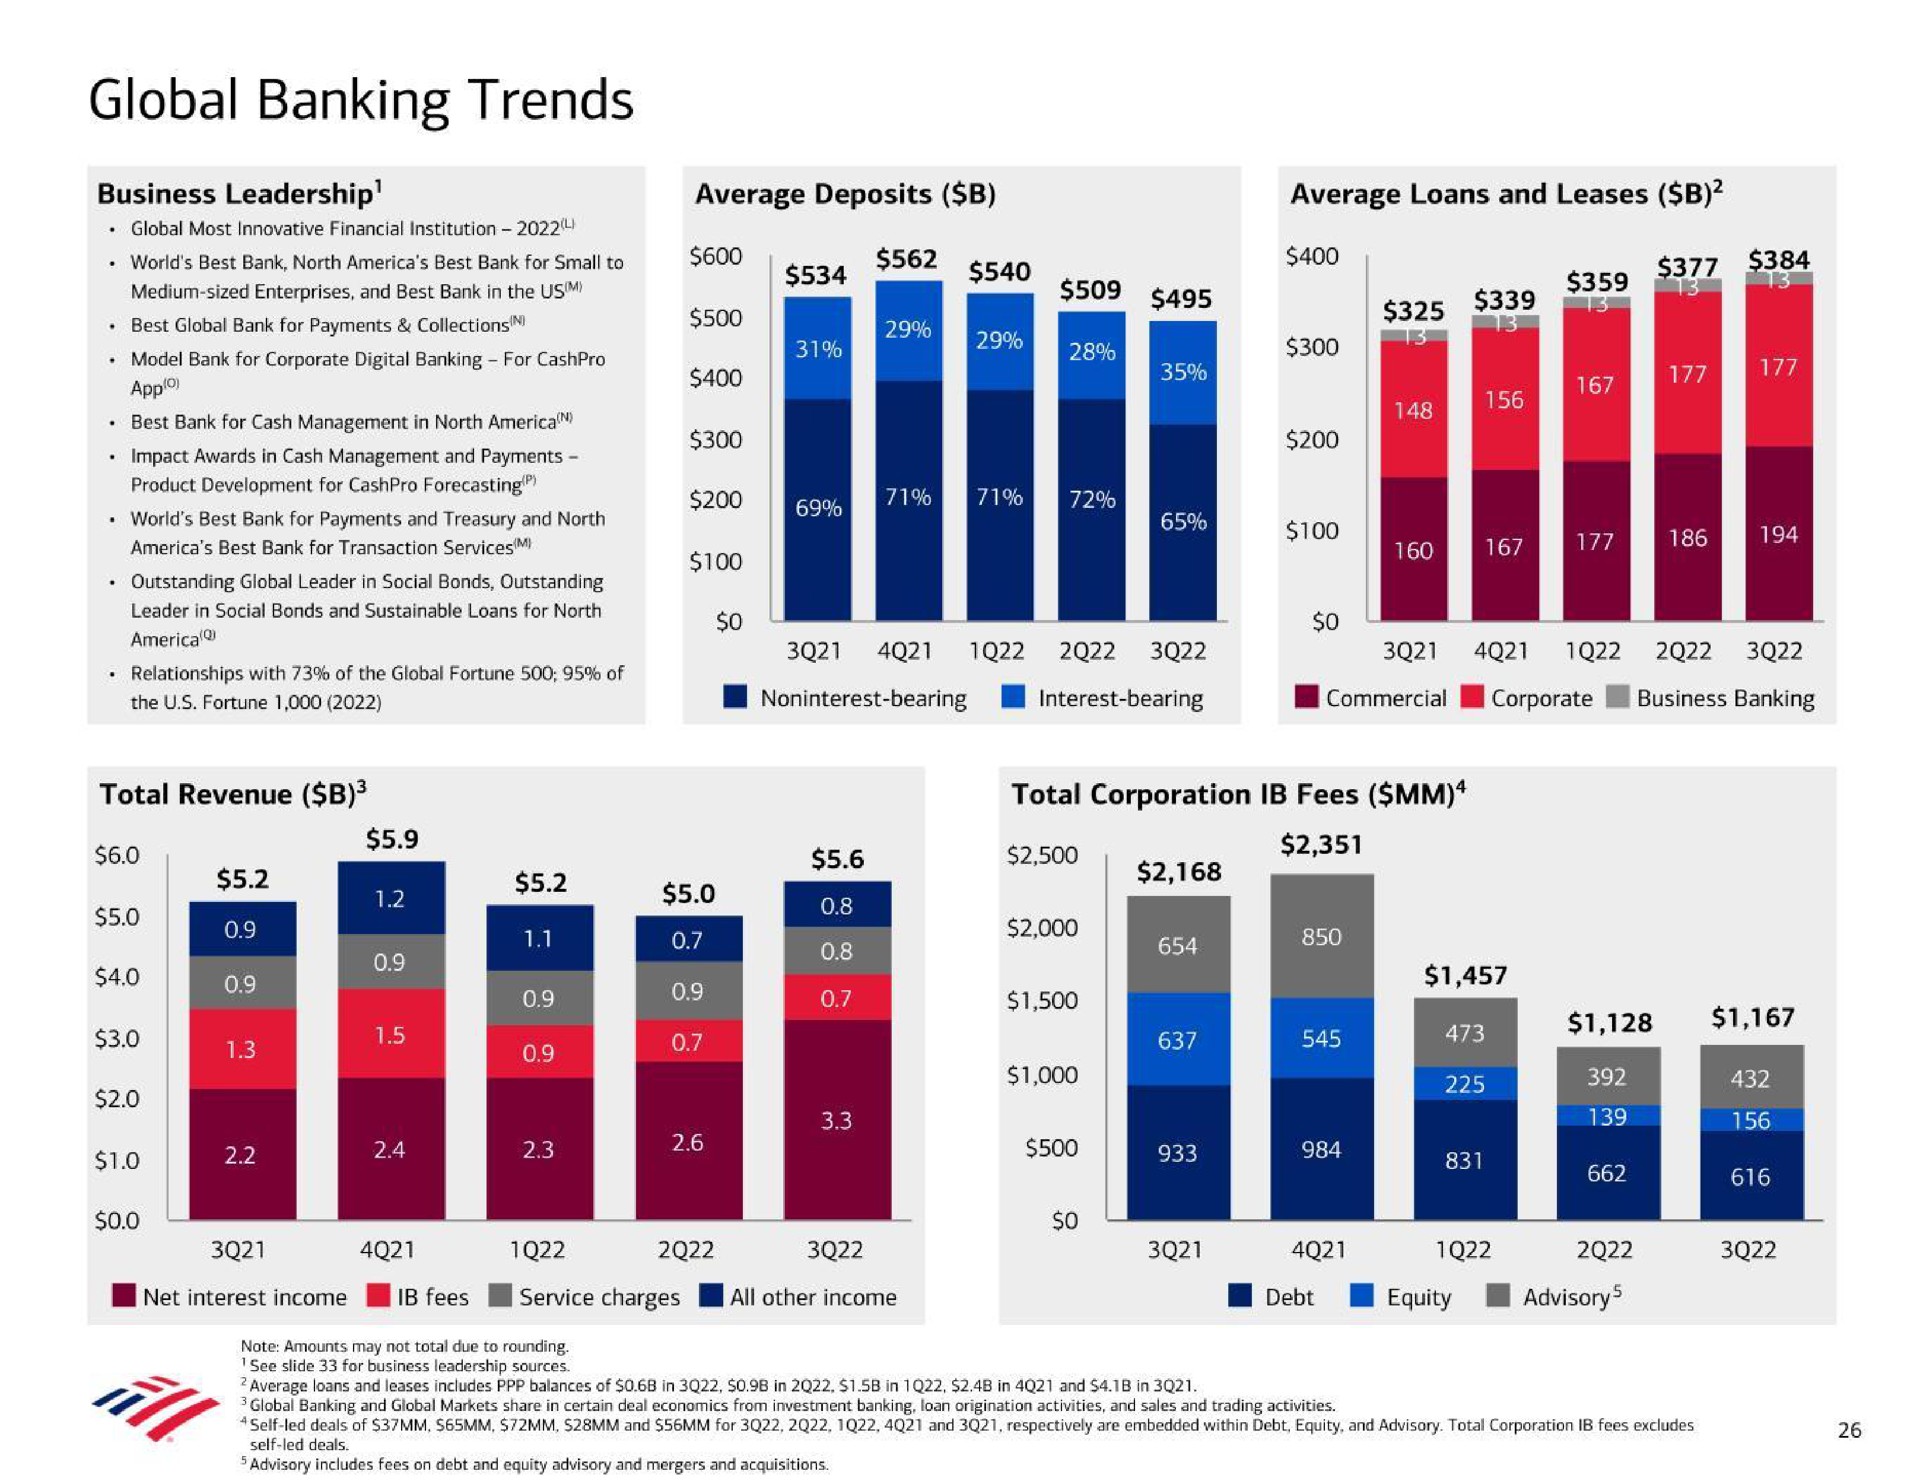 global banking trends ies tie total revenue total corporation fees | Bank of America